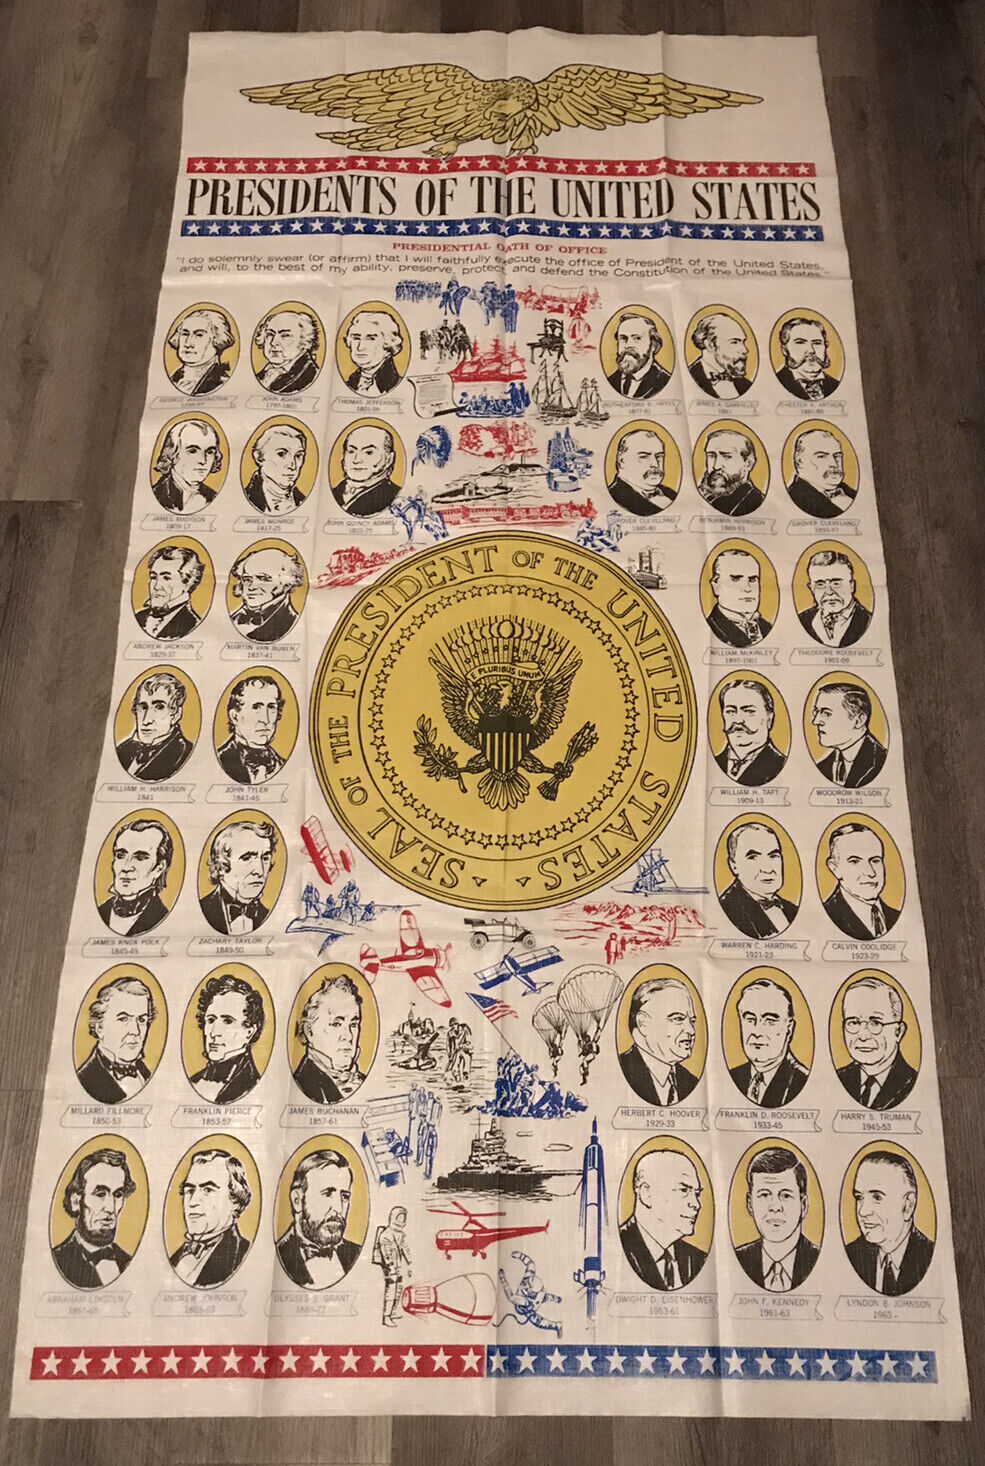 Vtg MCM 1960s US PRESIDENTS Plastic 61 x 31 Educational Decor Poster - AS IS